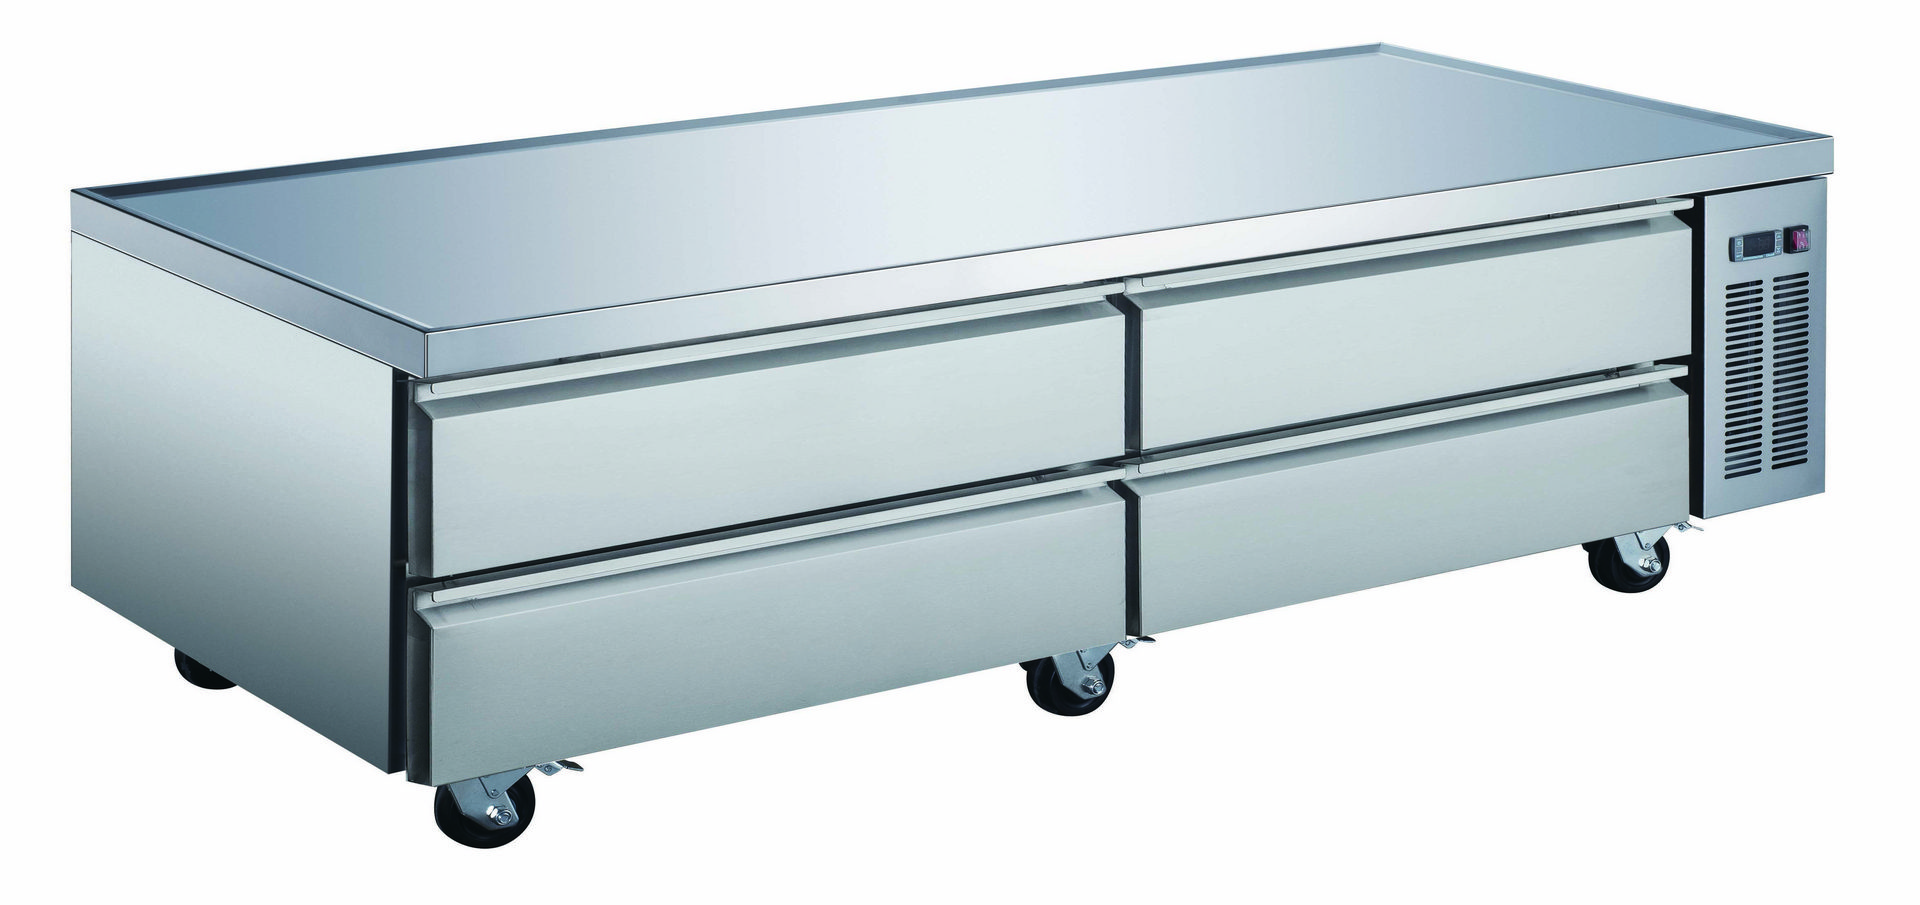 A stainless steel table with four drawers on the bottom.